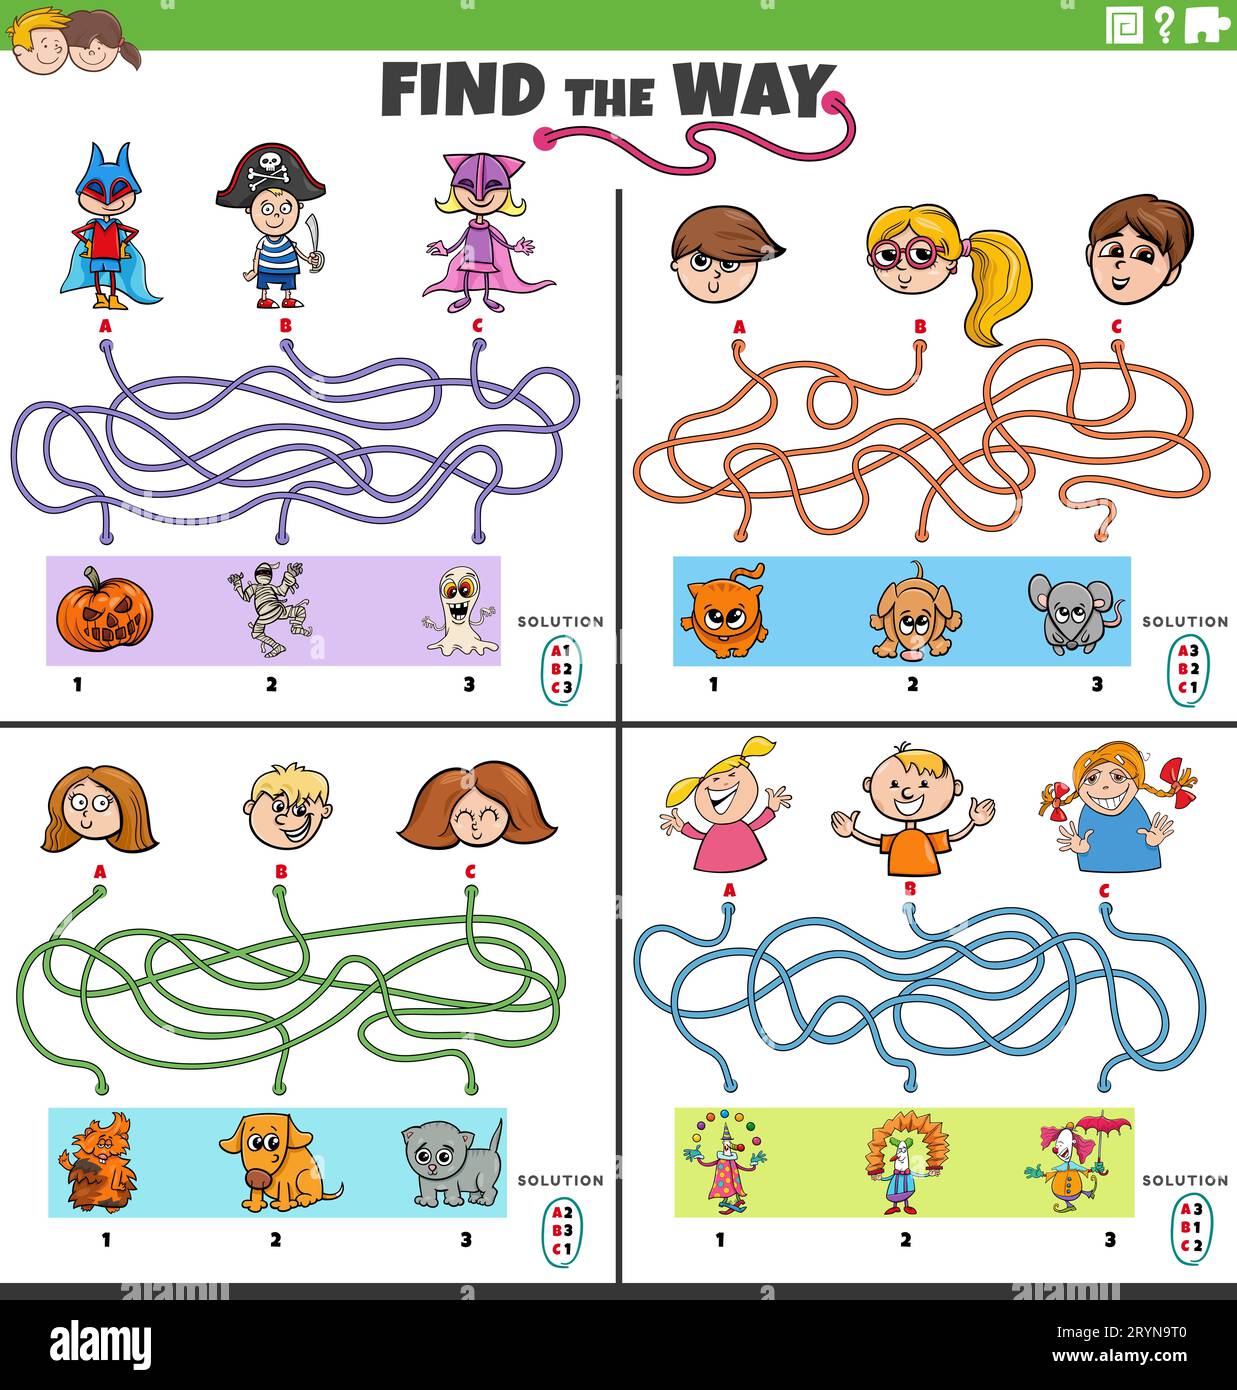 Cartoon illustration of find the way maze puzzle games set with funny comic children characters Stock Photo